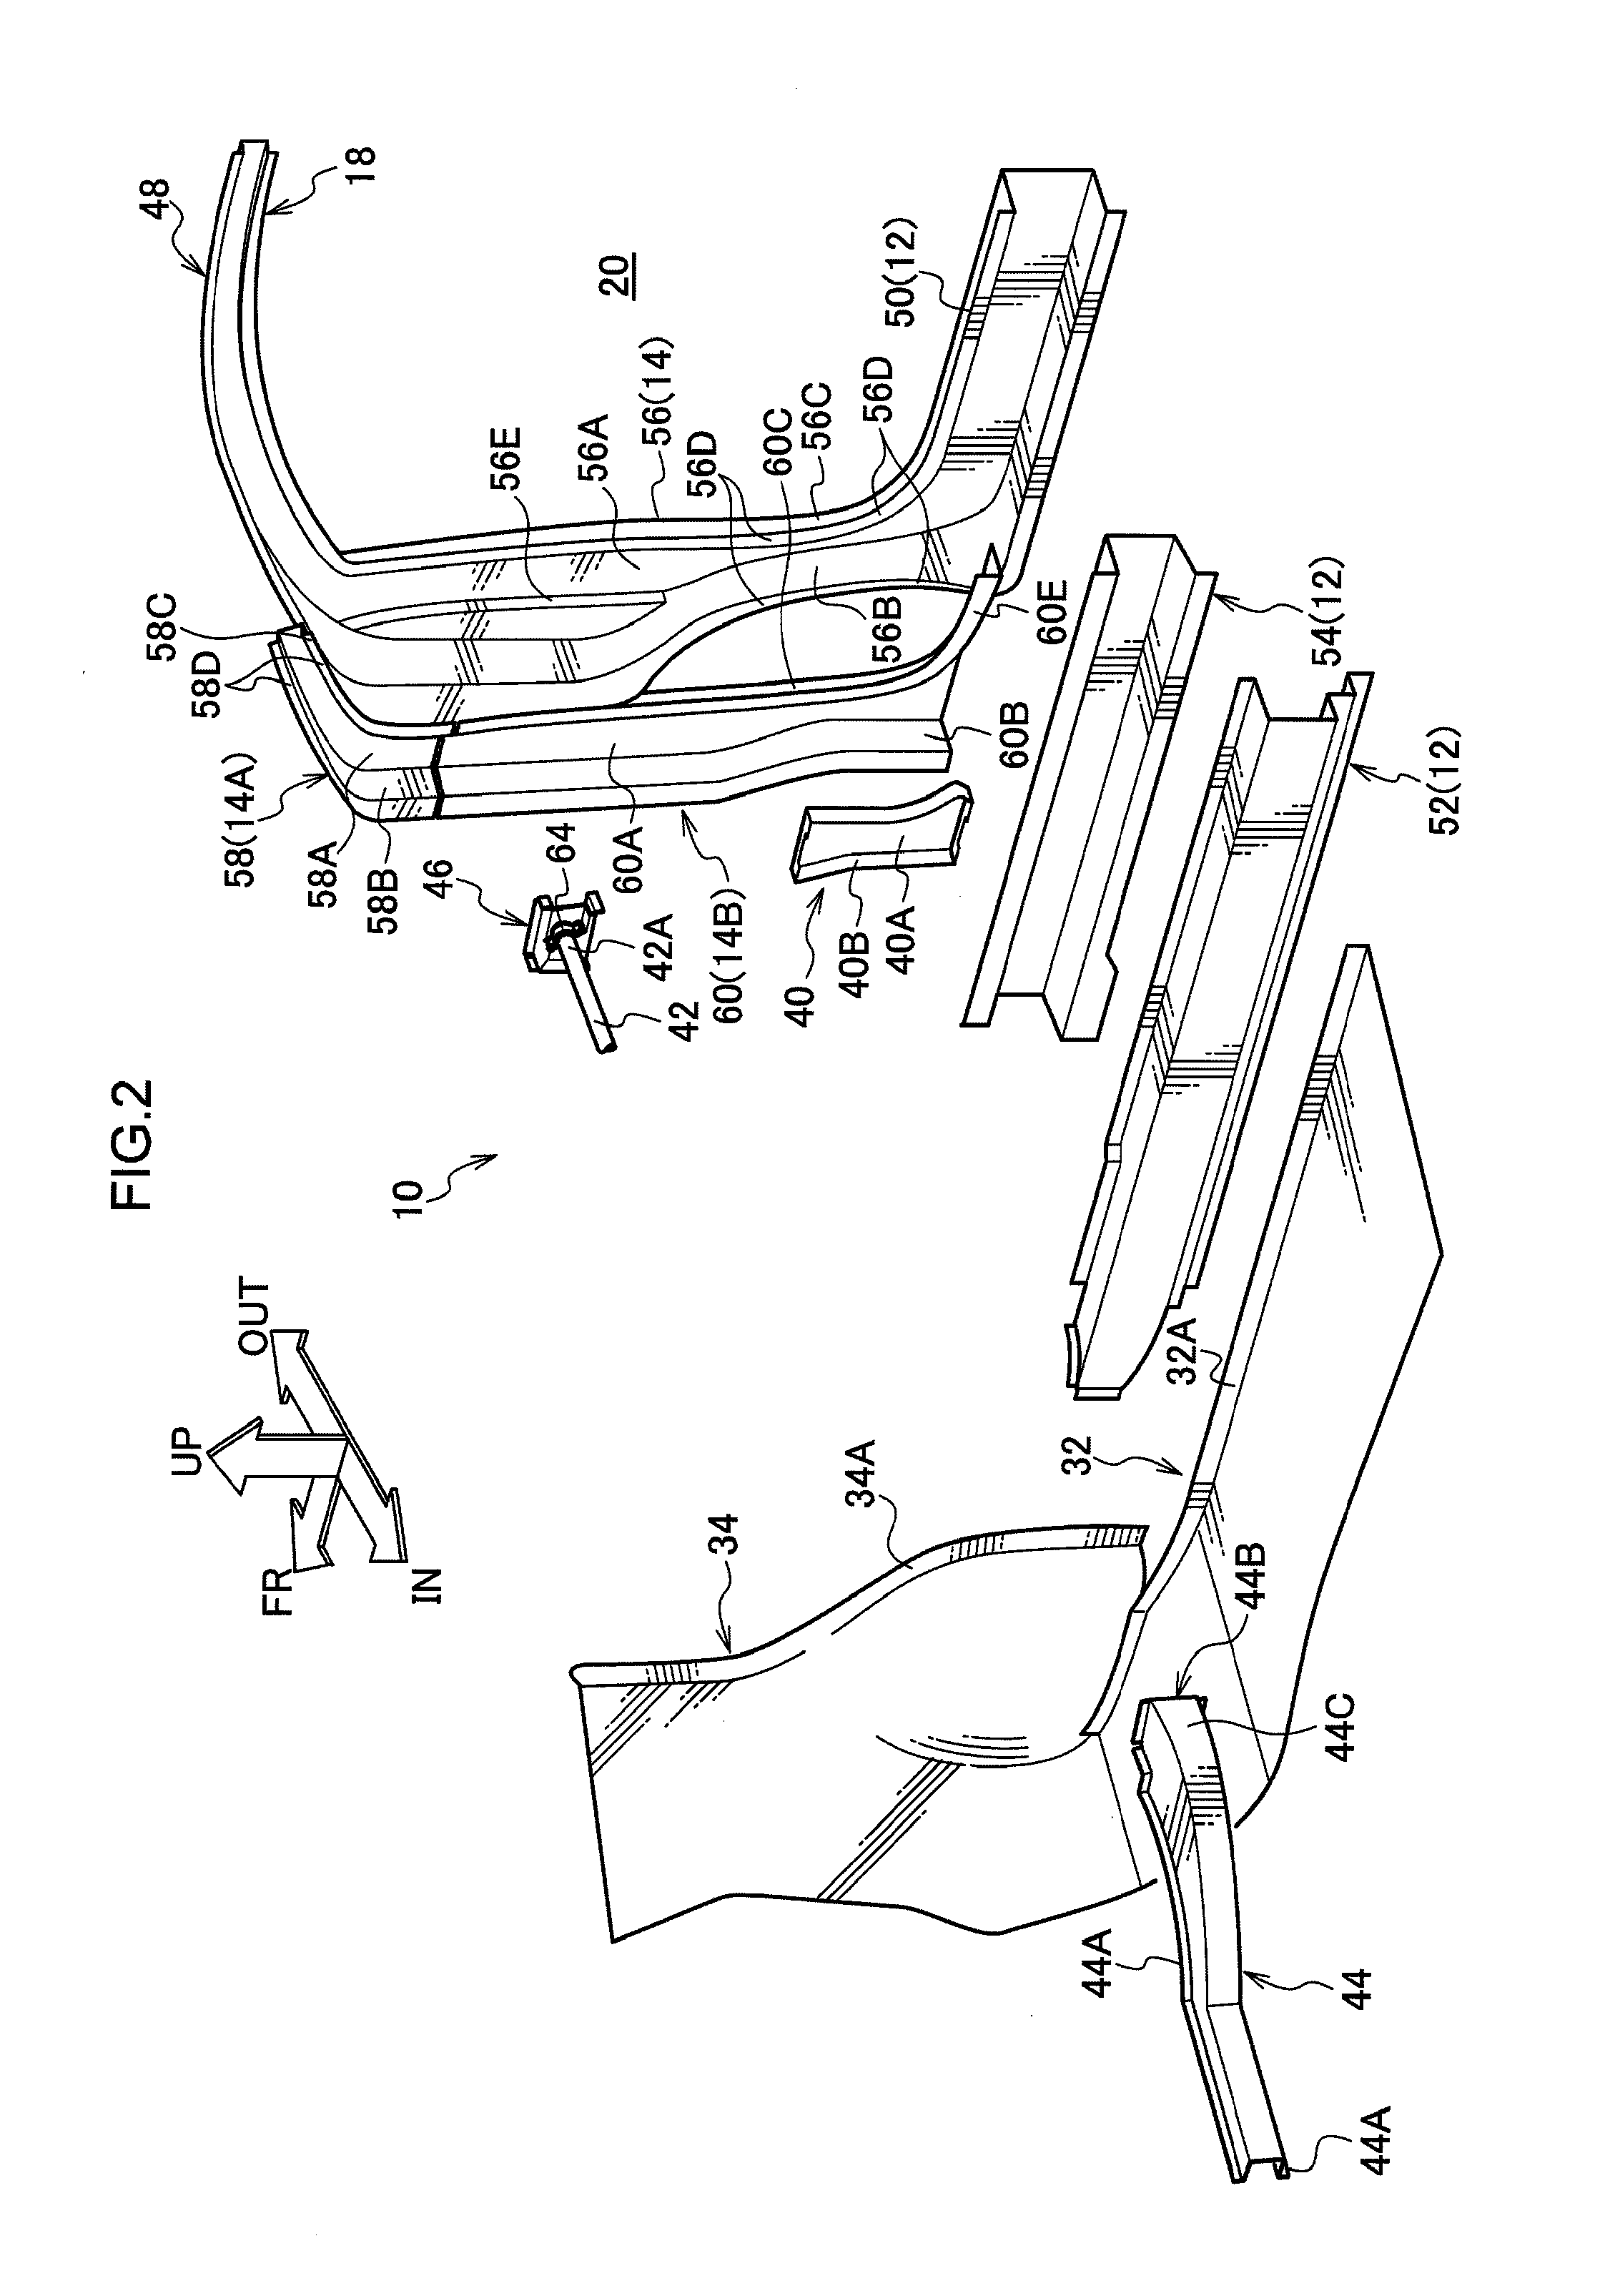 Vehicle body forward portion  structure